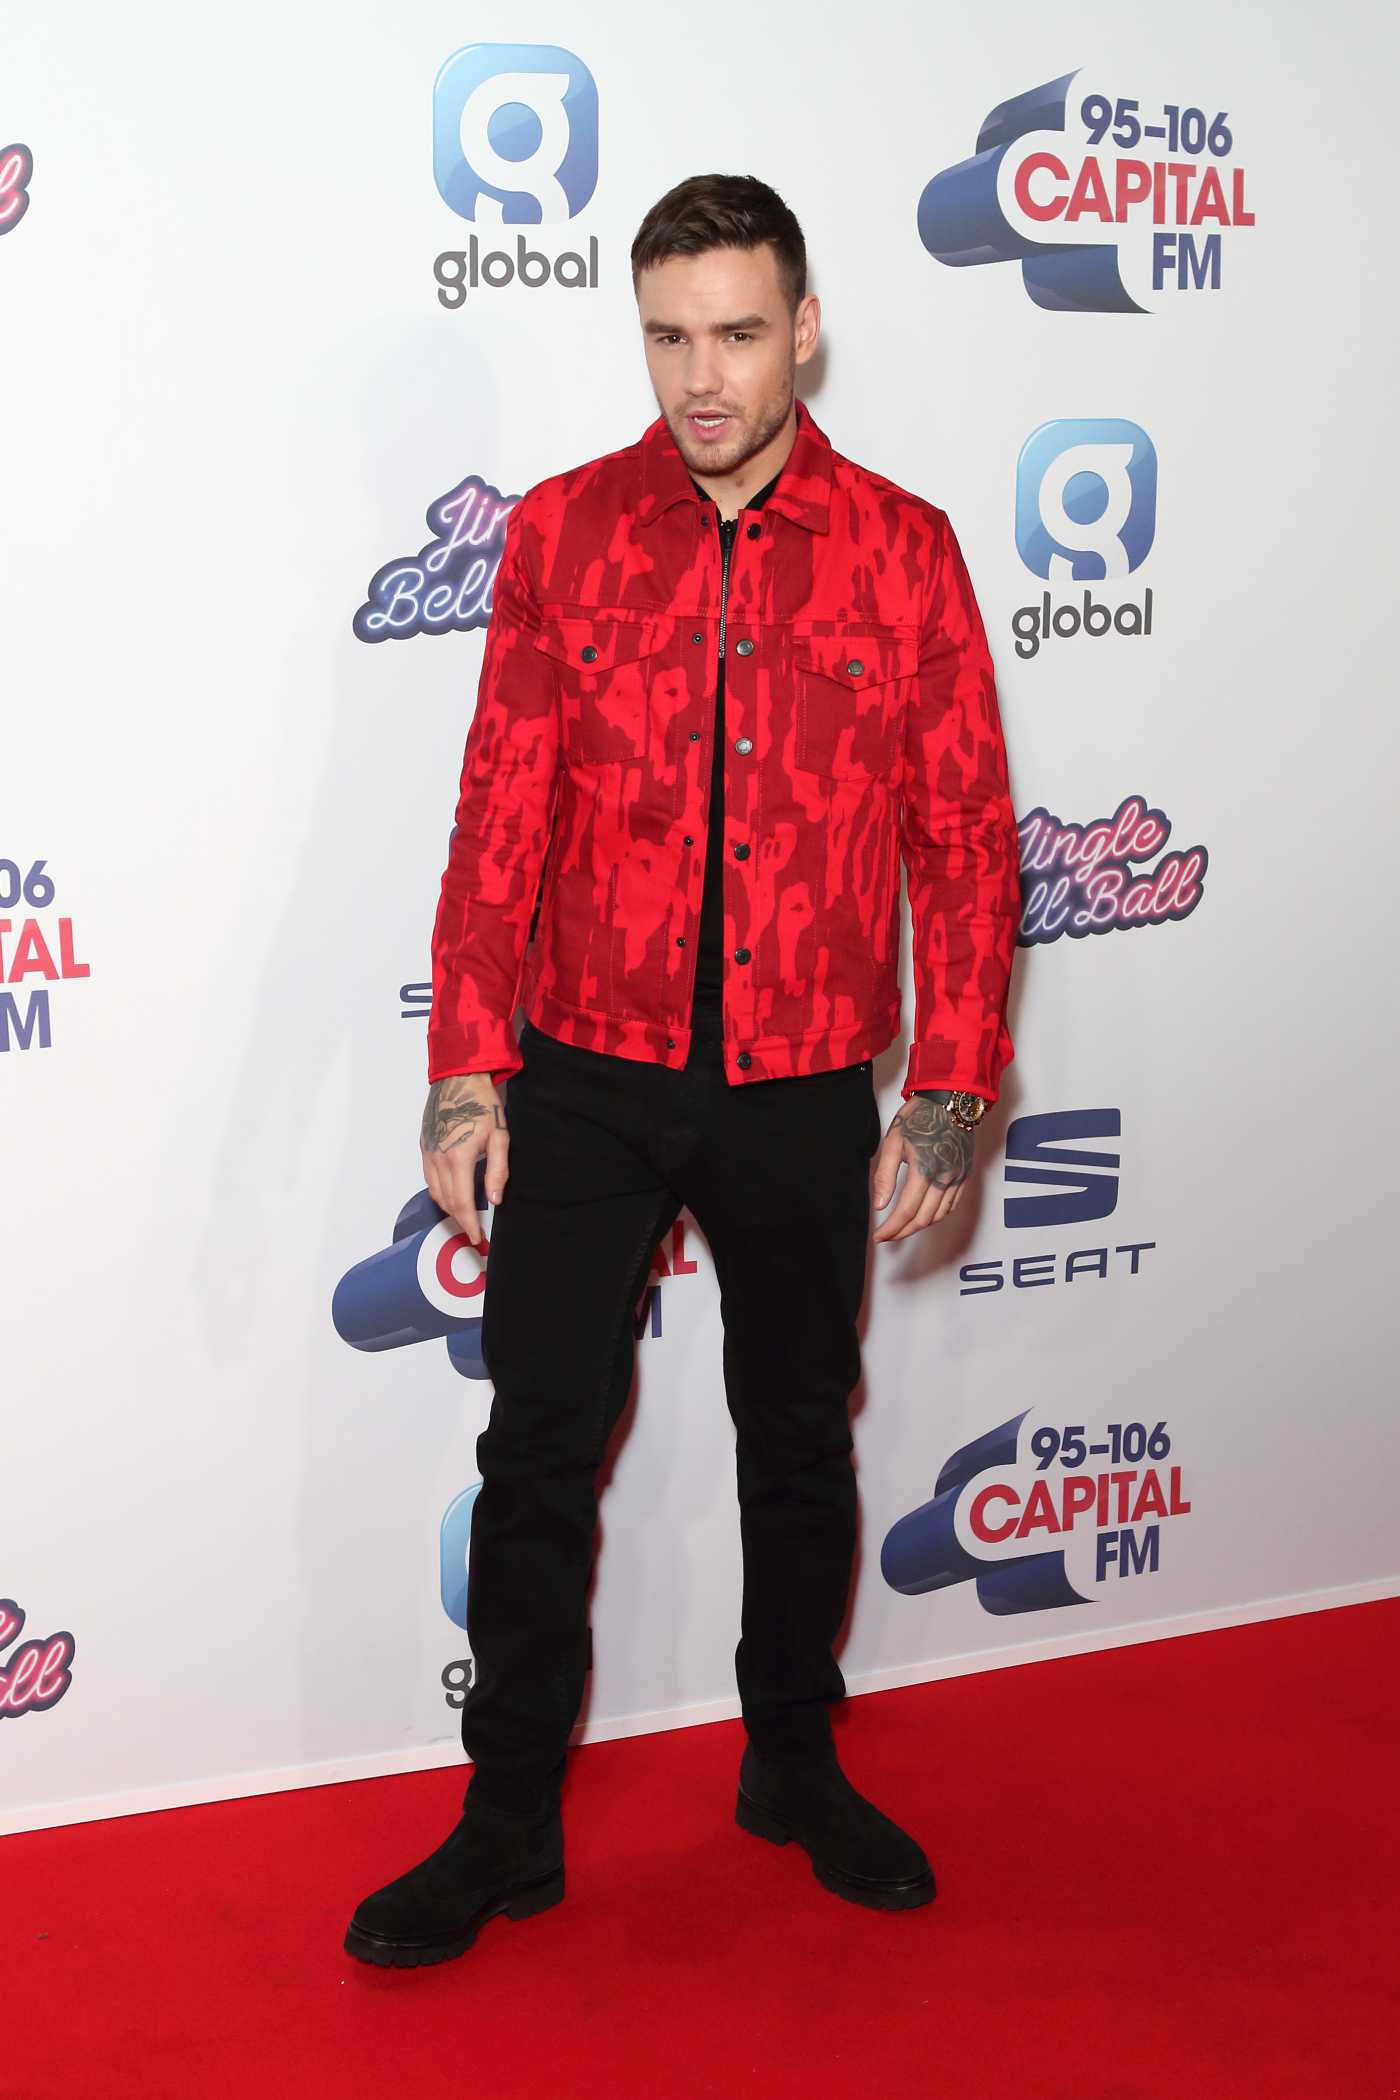 Liam Payne Attends 2019 Capital's Jingle Bell Ball at The O2 Arena in London 12/07/2019